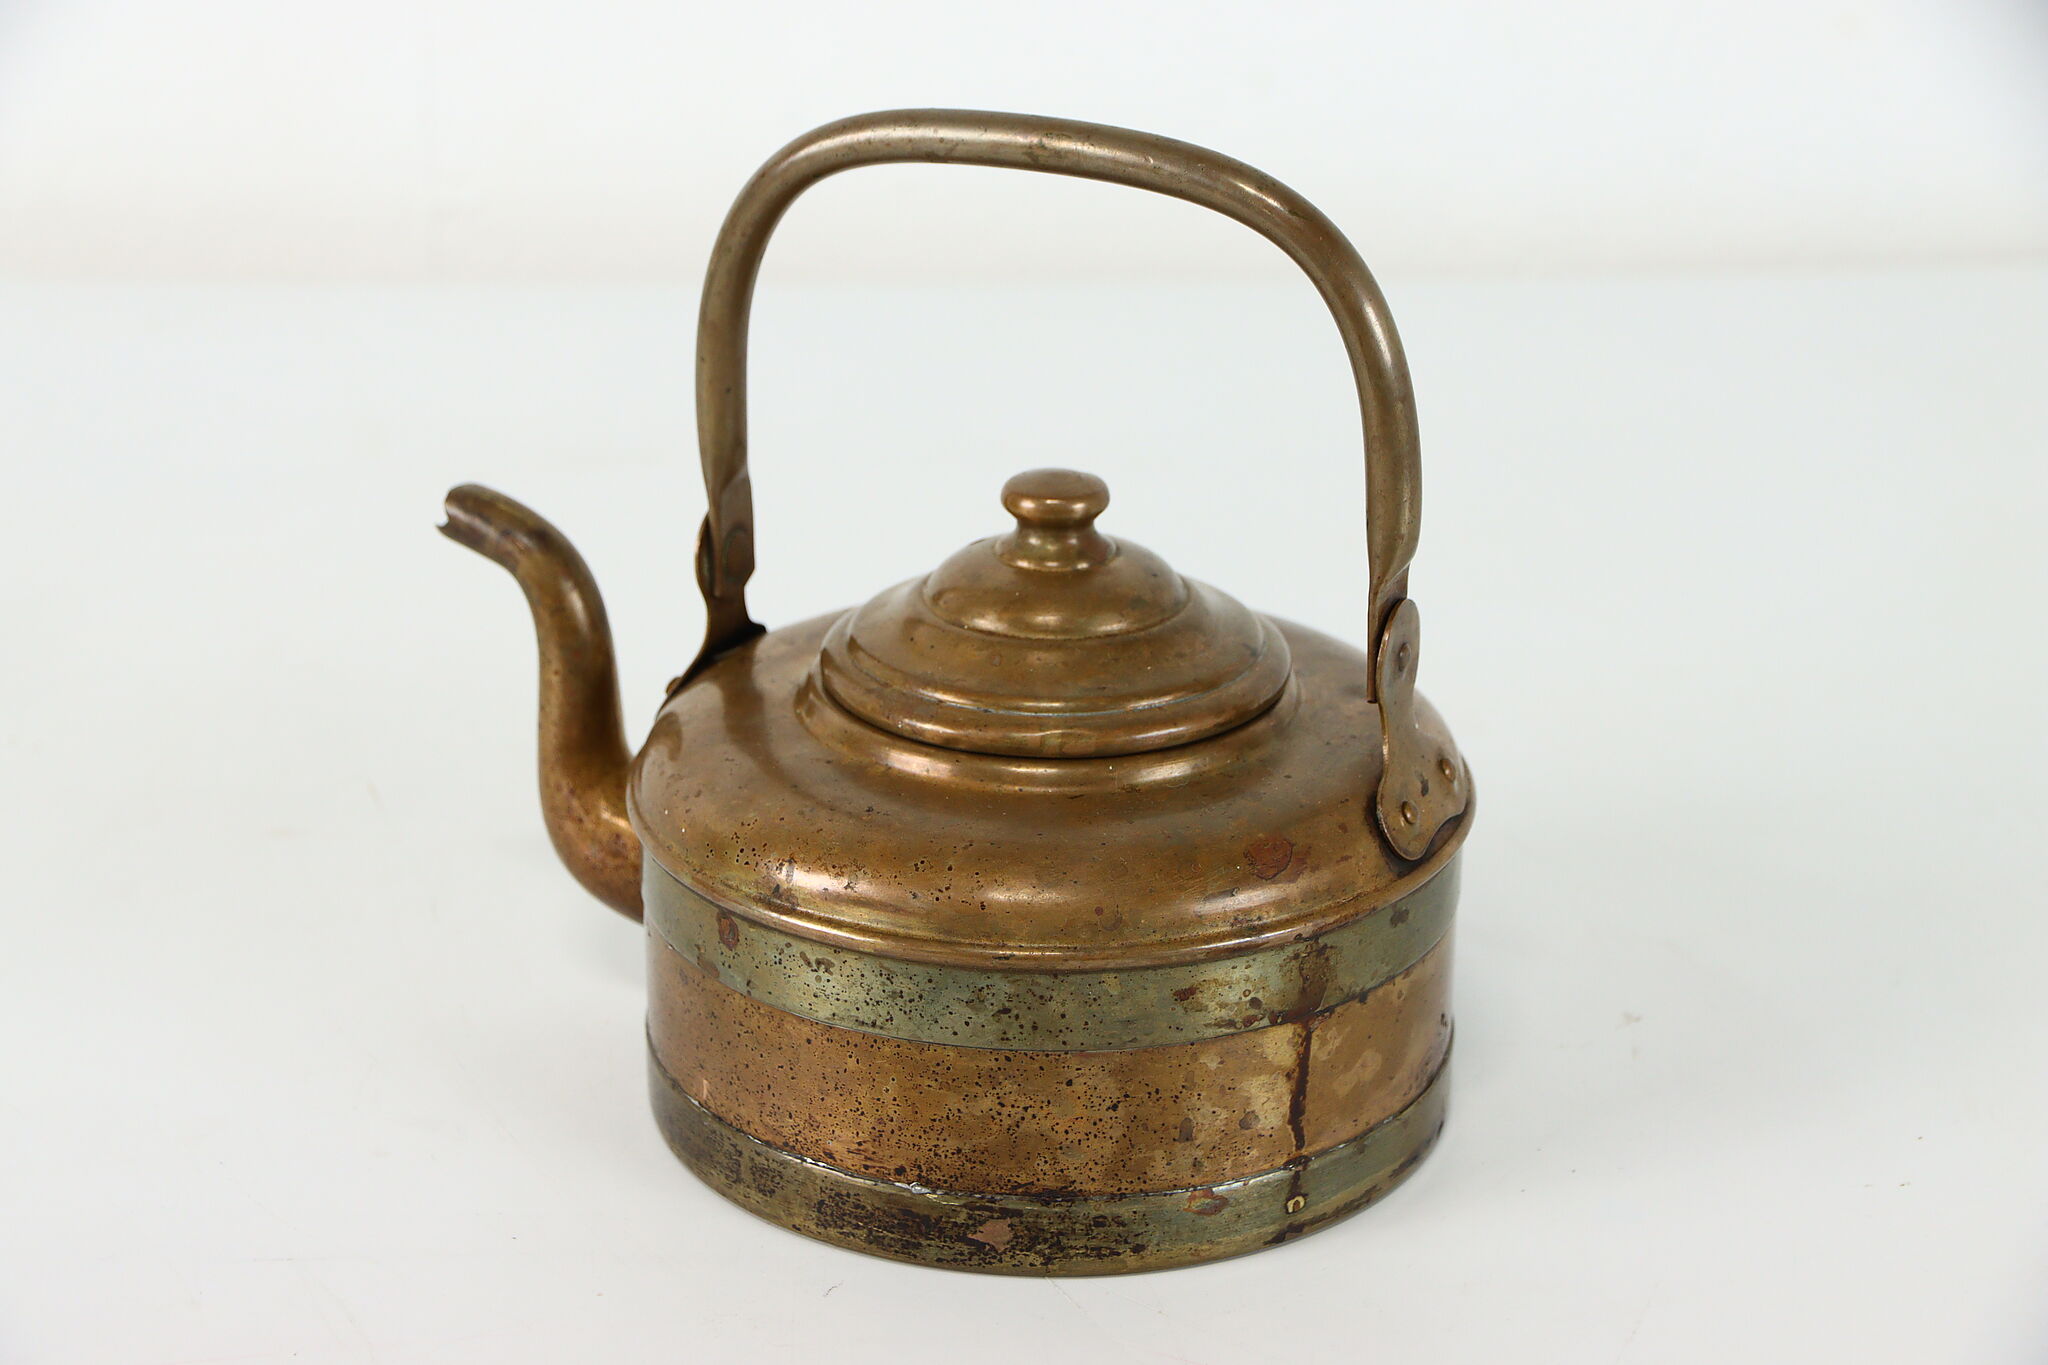 Farmhouse Vintage Small Copper and Brass Teapot or Kettle